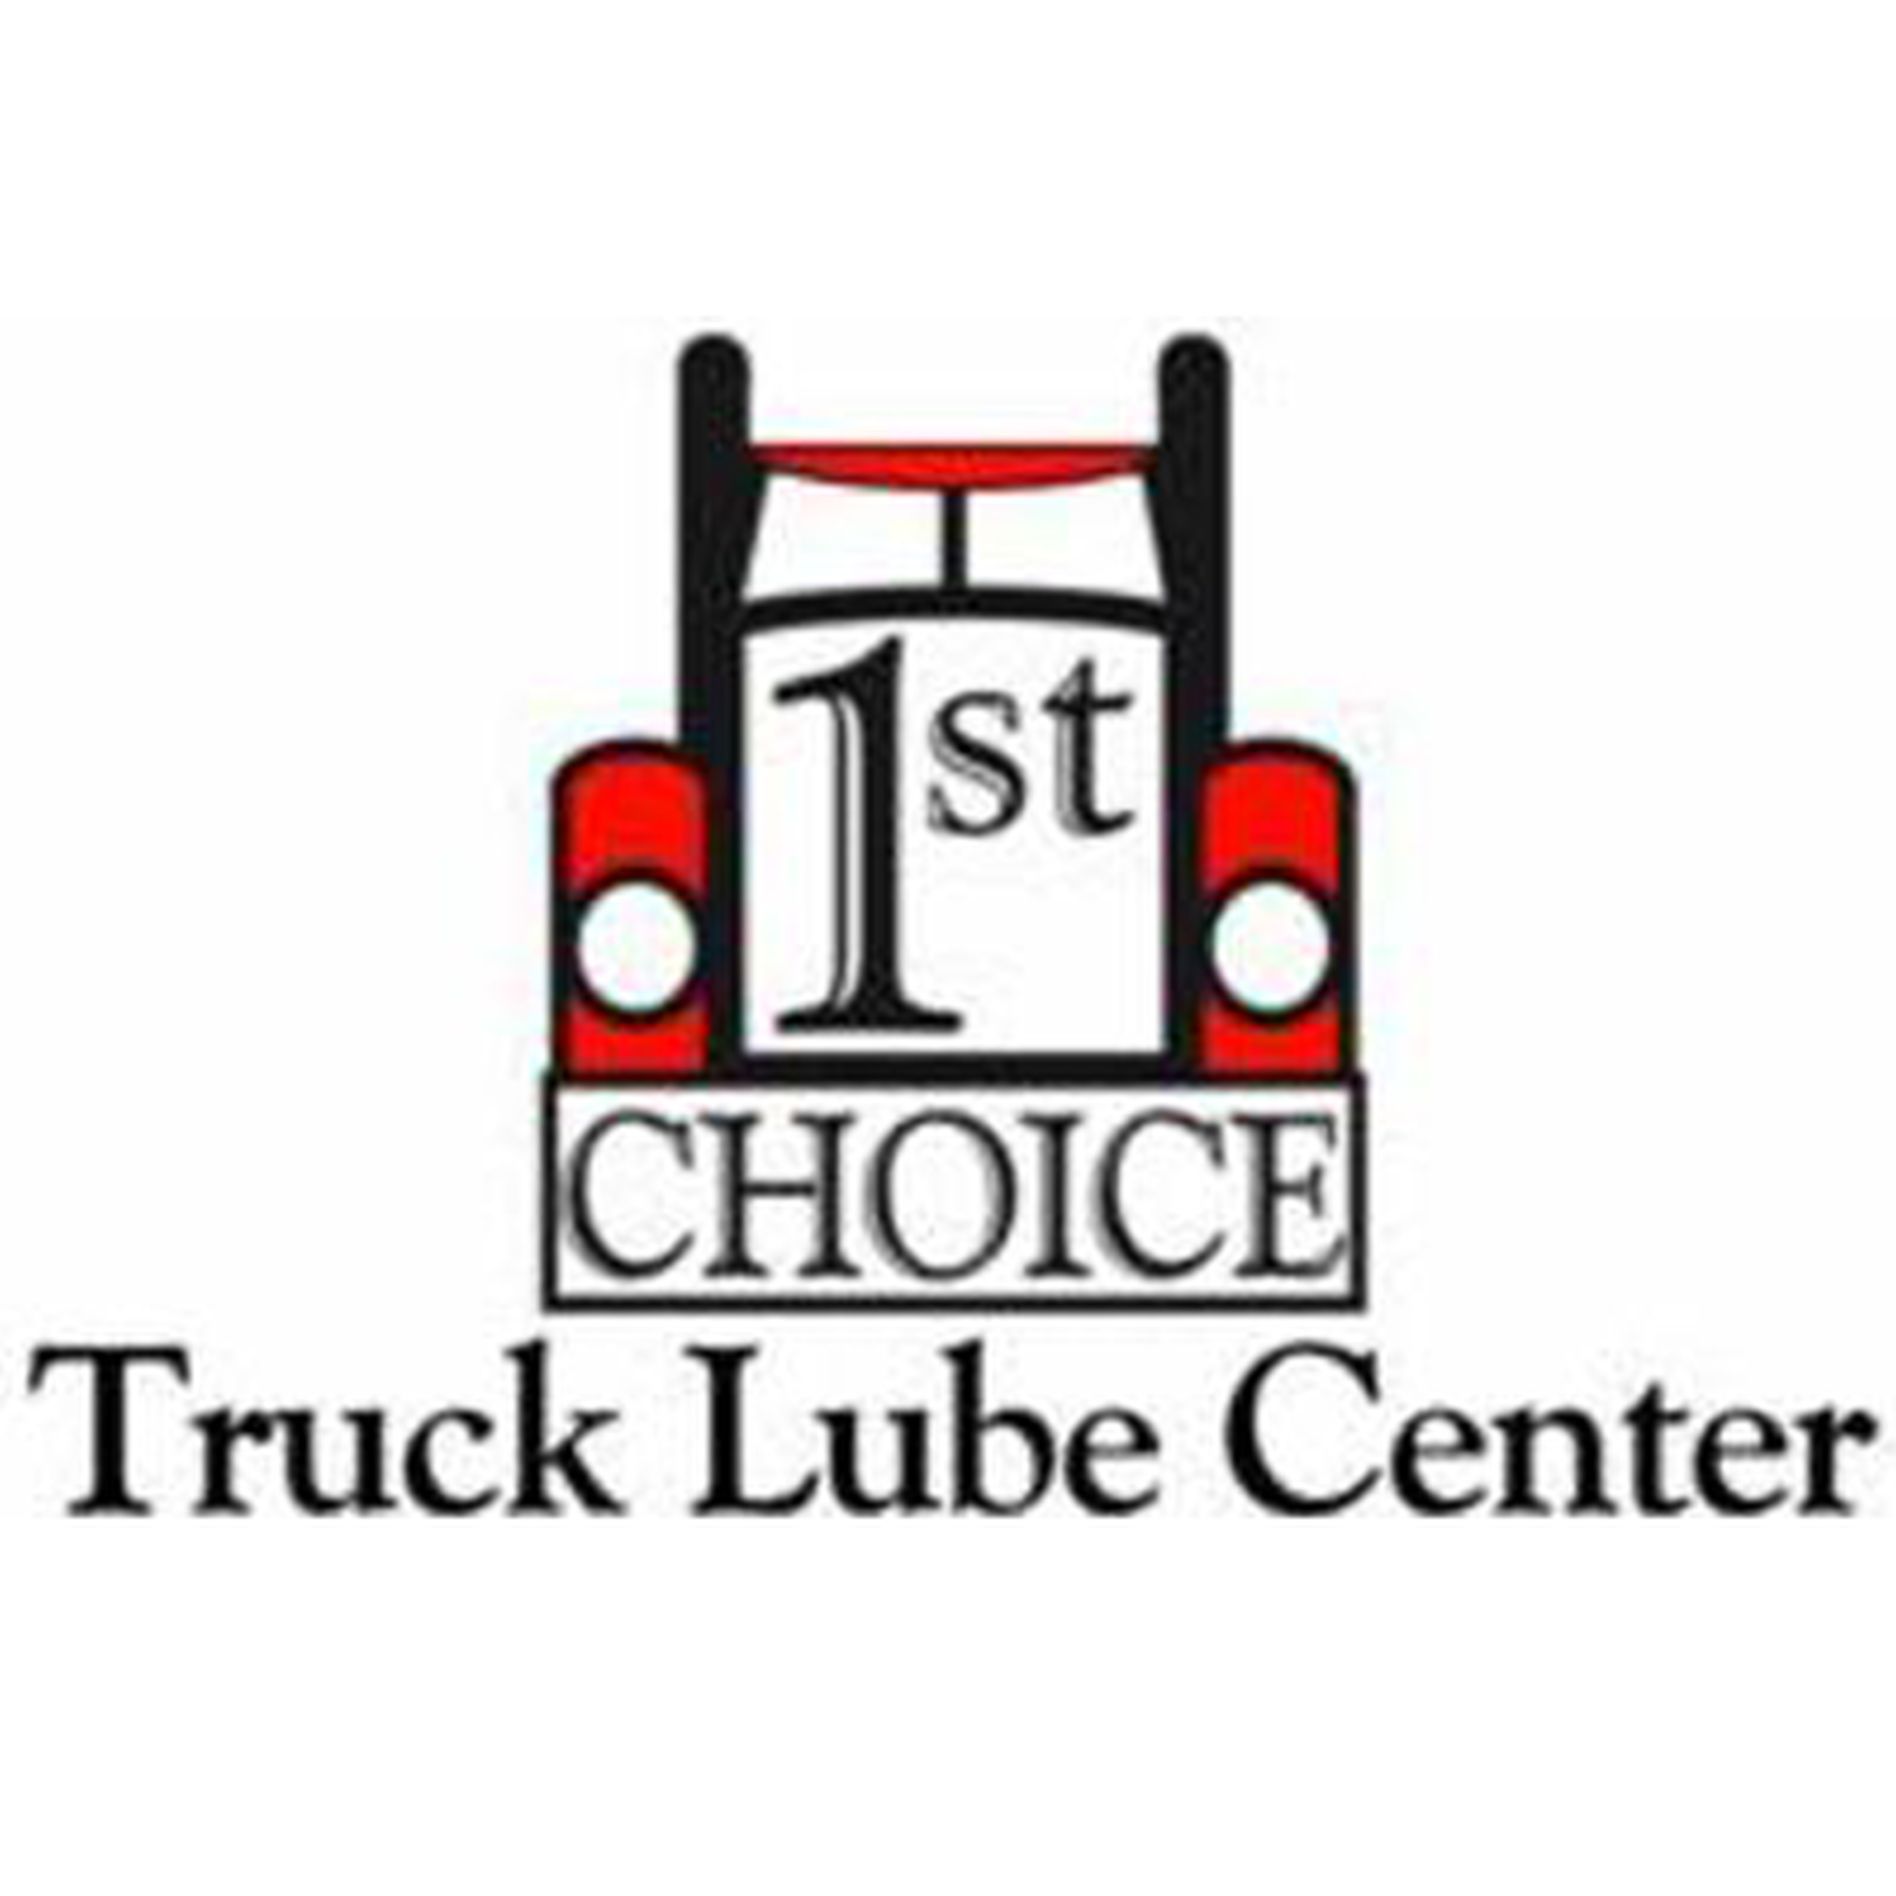 first choice truck lube